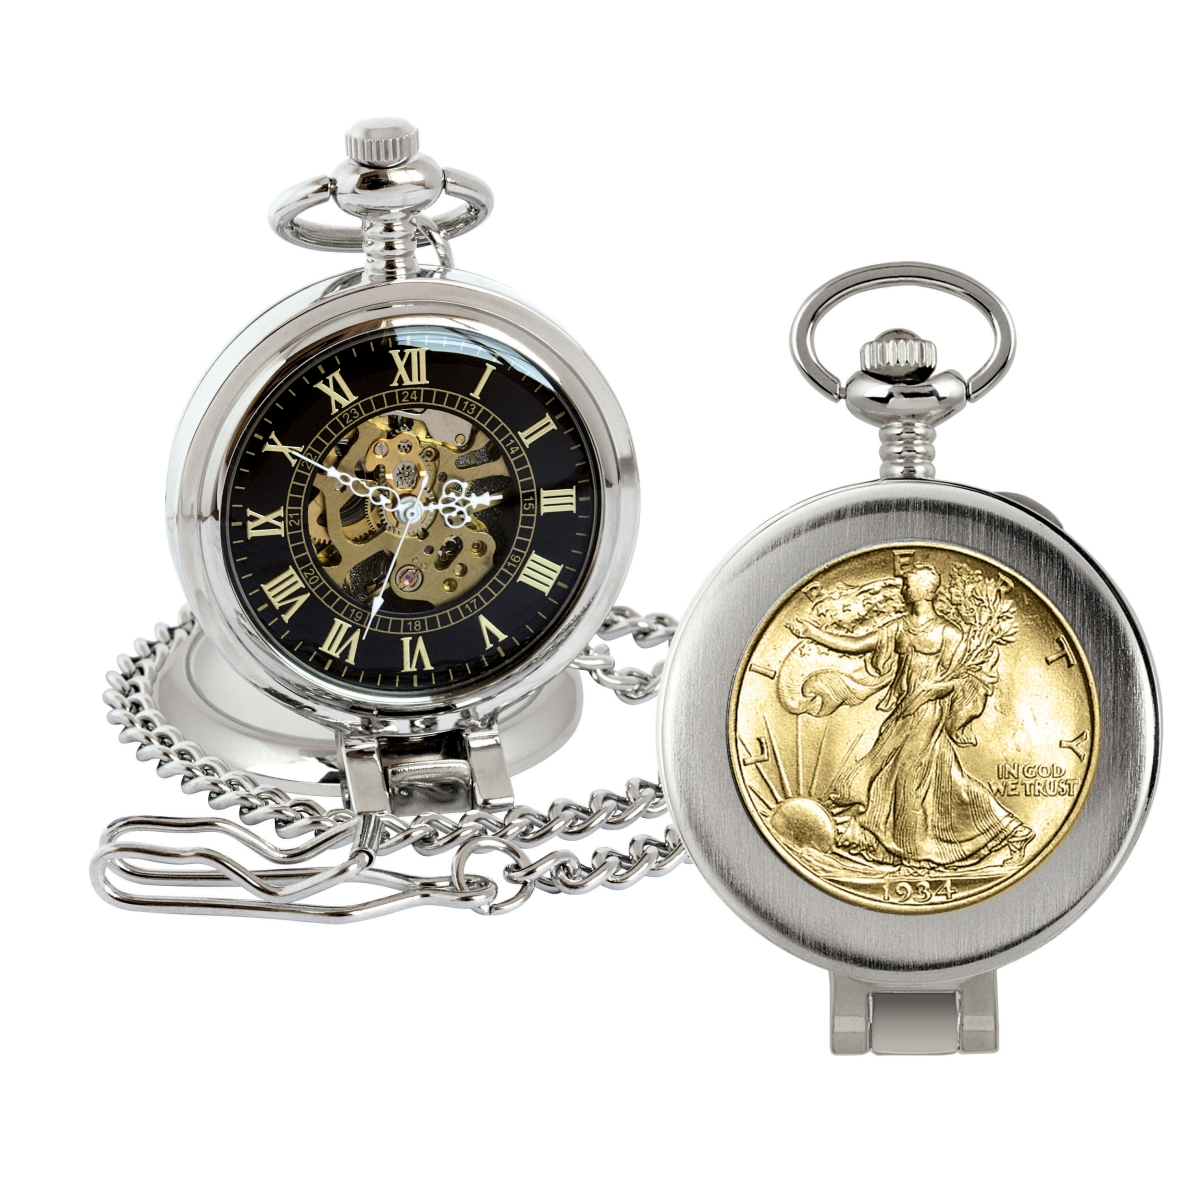 Picture of American Coin Treasures 16278 Gold-Layered Silver Walking Liberty Half Dollar Coin Pocket Watch with Skeleton Movement, Black Dial with Gold Roman Numerals - Magnifying Glass